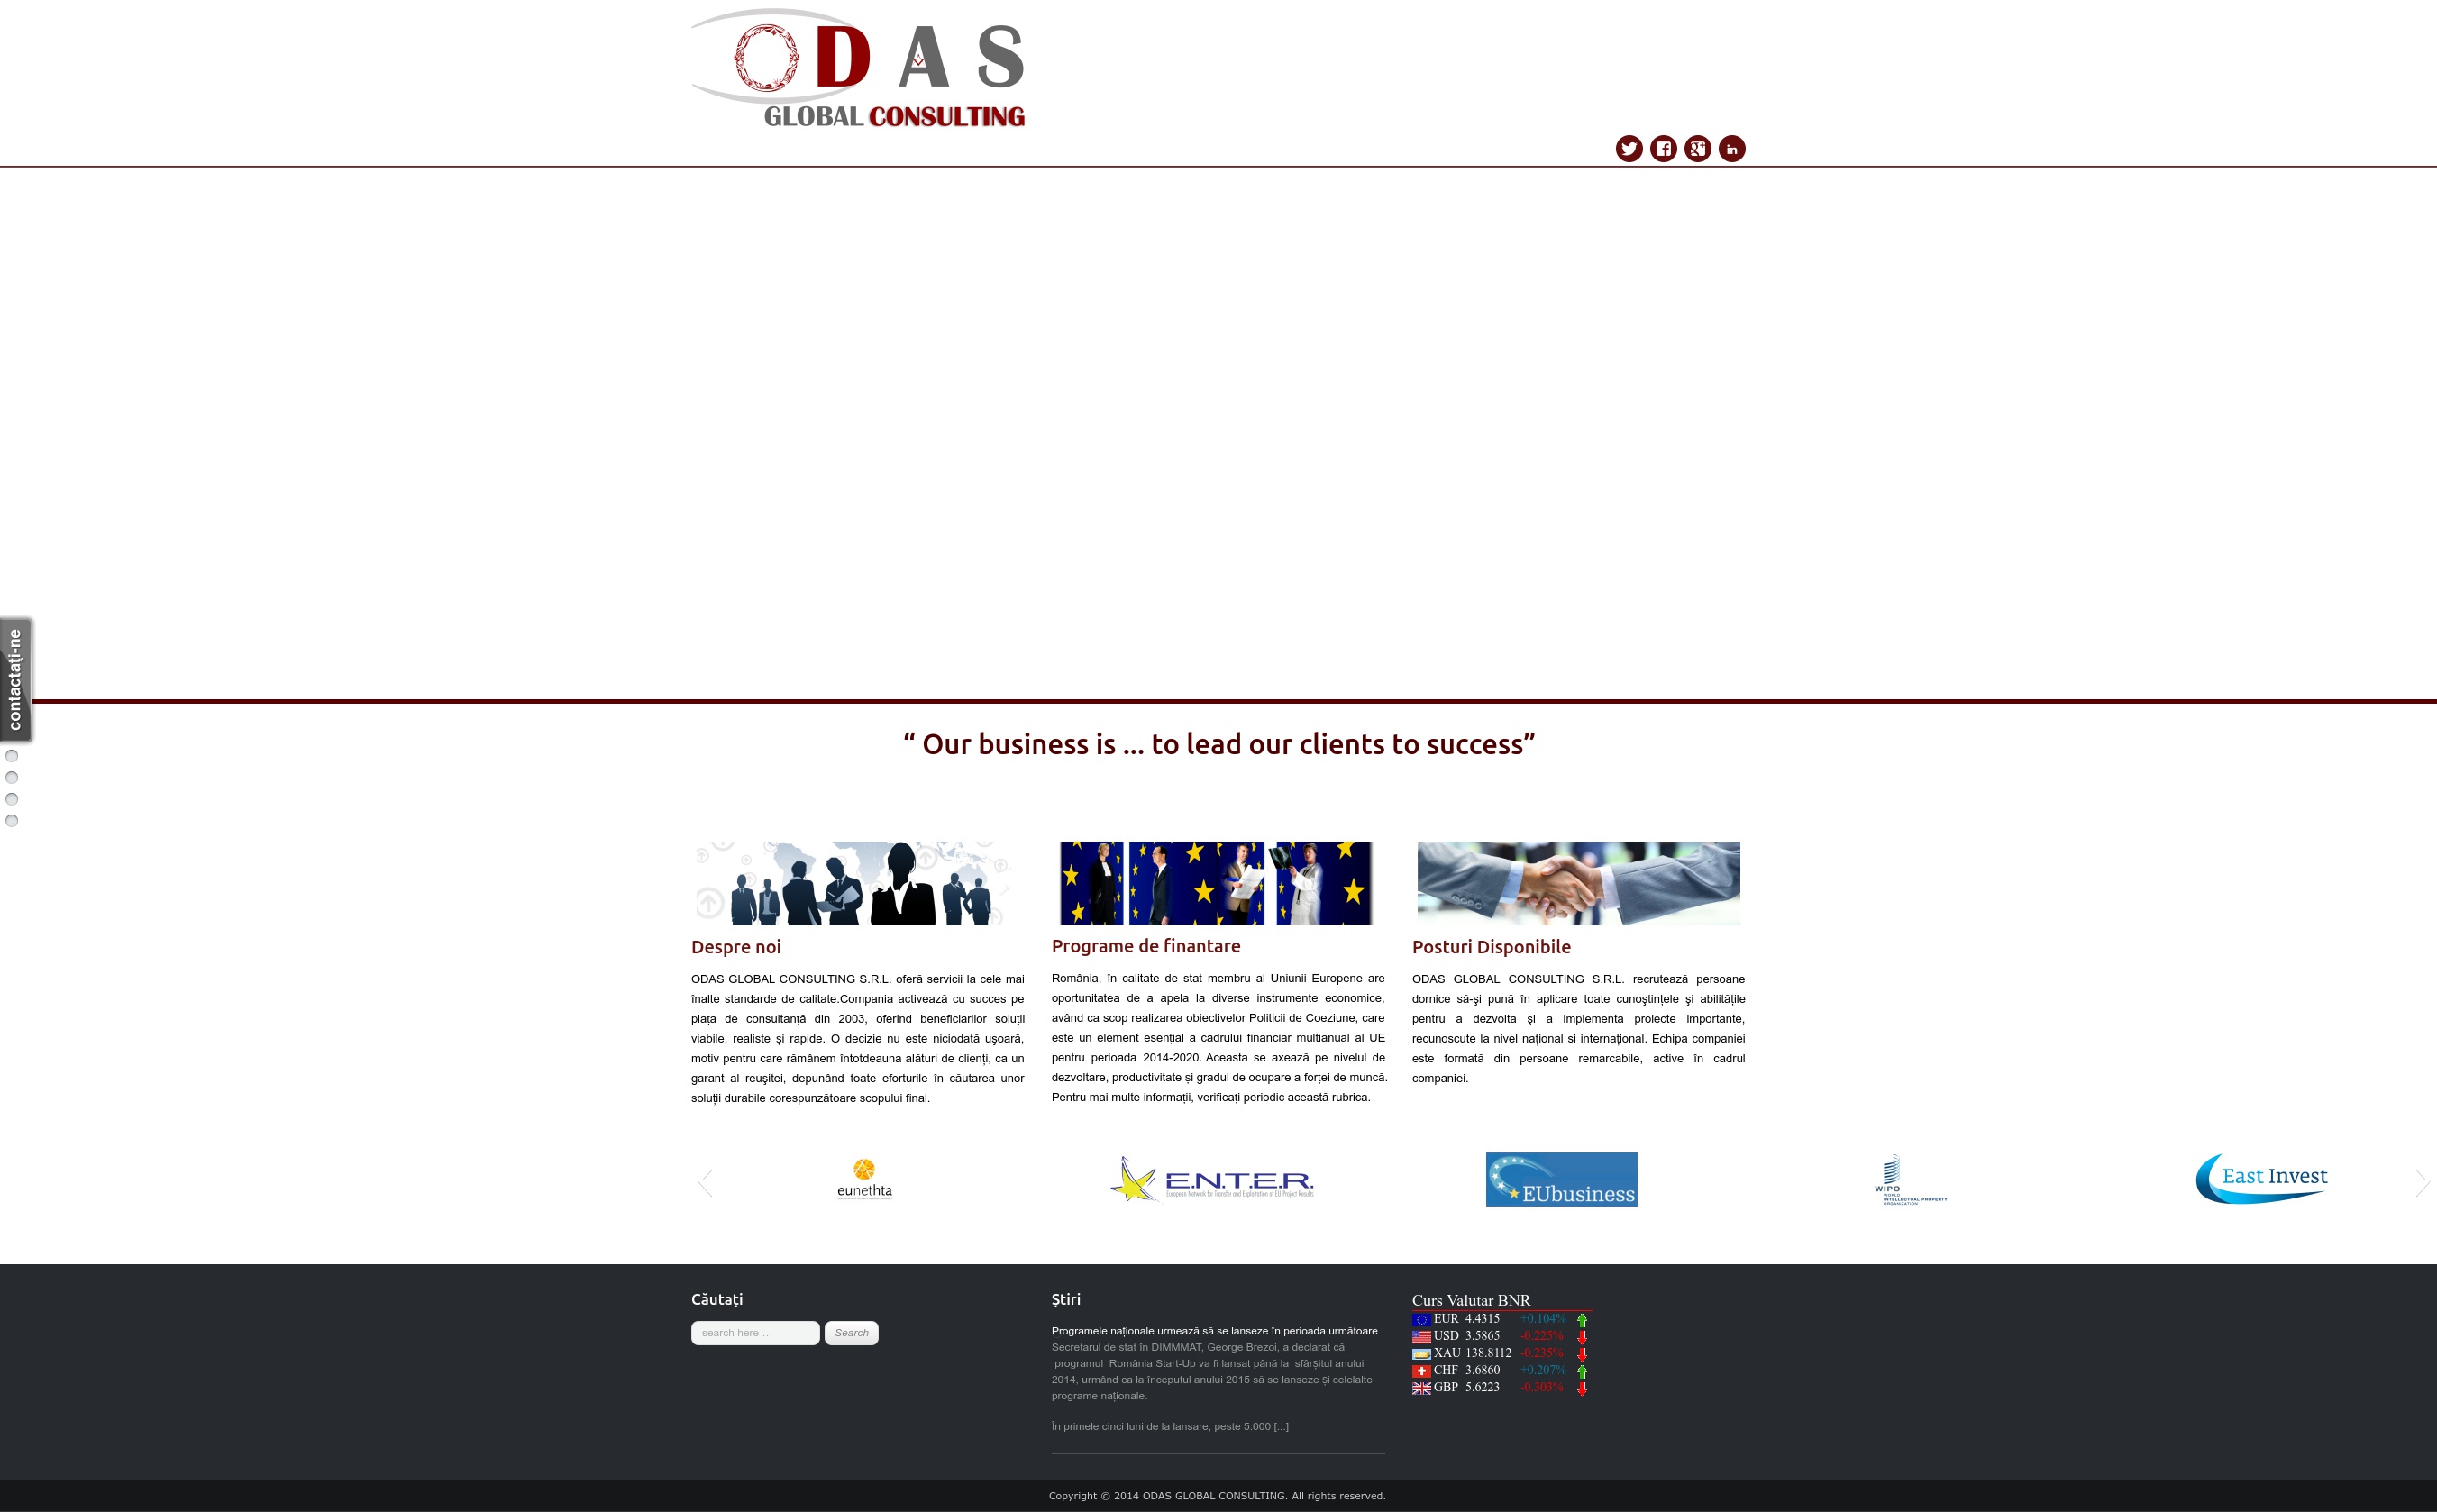 ODAS Global Consulting